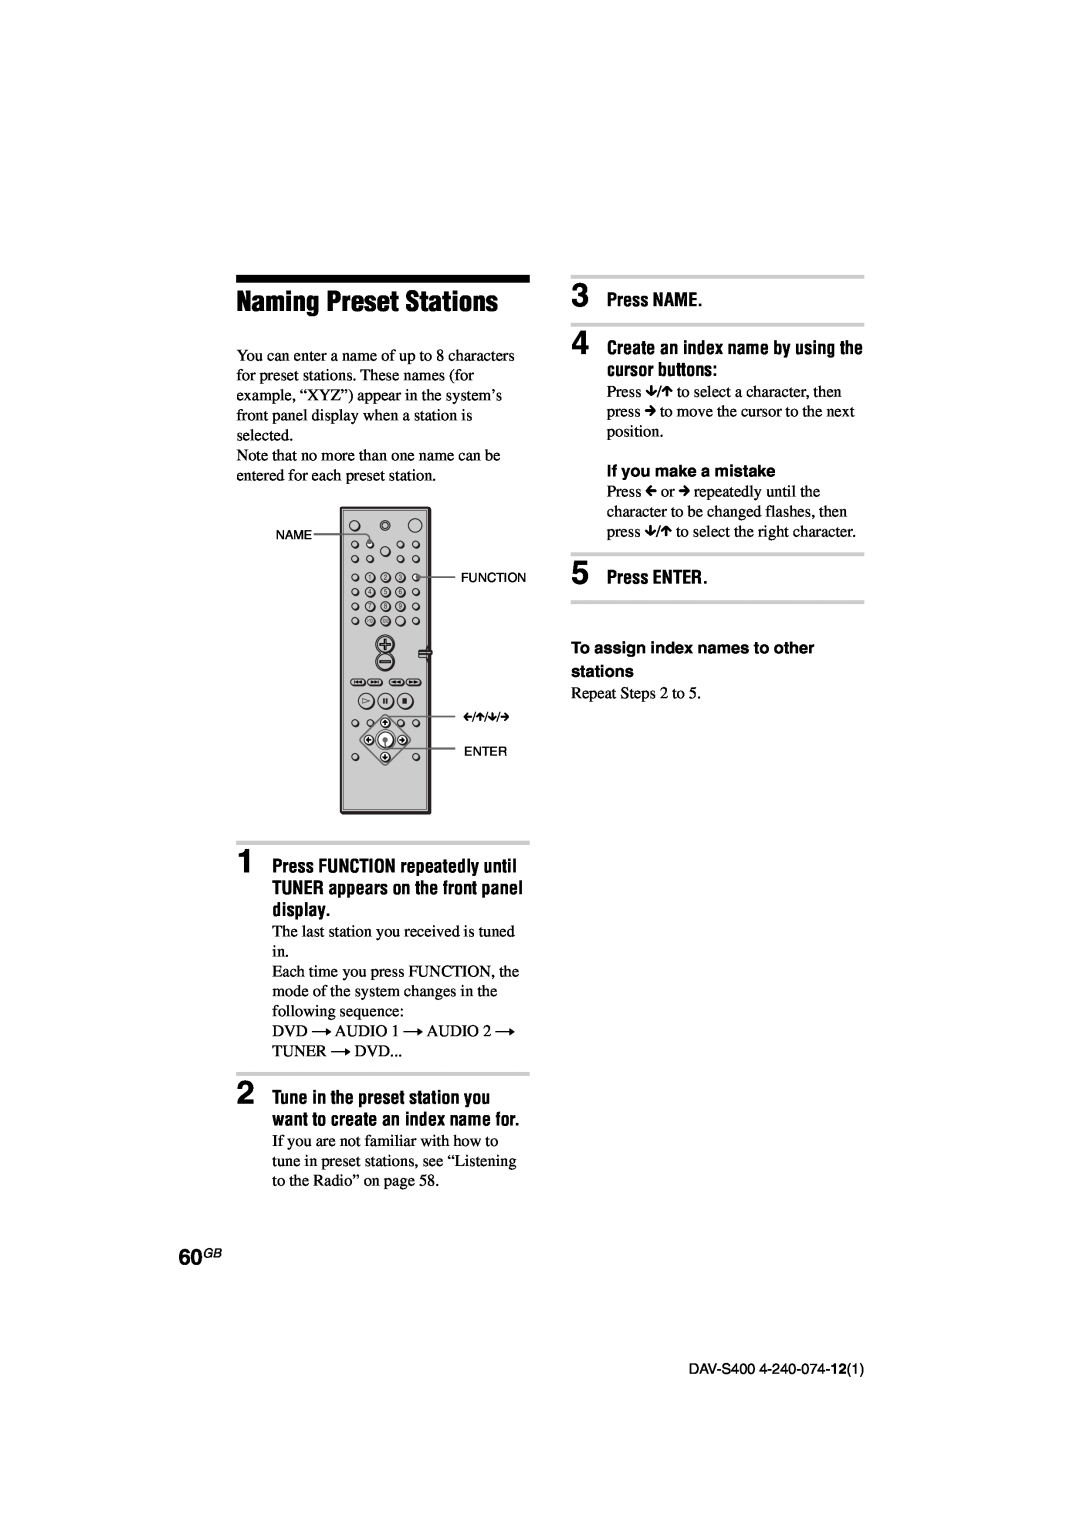 Sony DAV-S400 manual Naming Preset Stations, 60GB, Press NAME, To assign index names to other stations, Press ENTER 